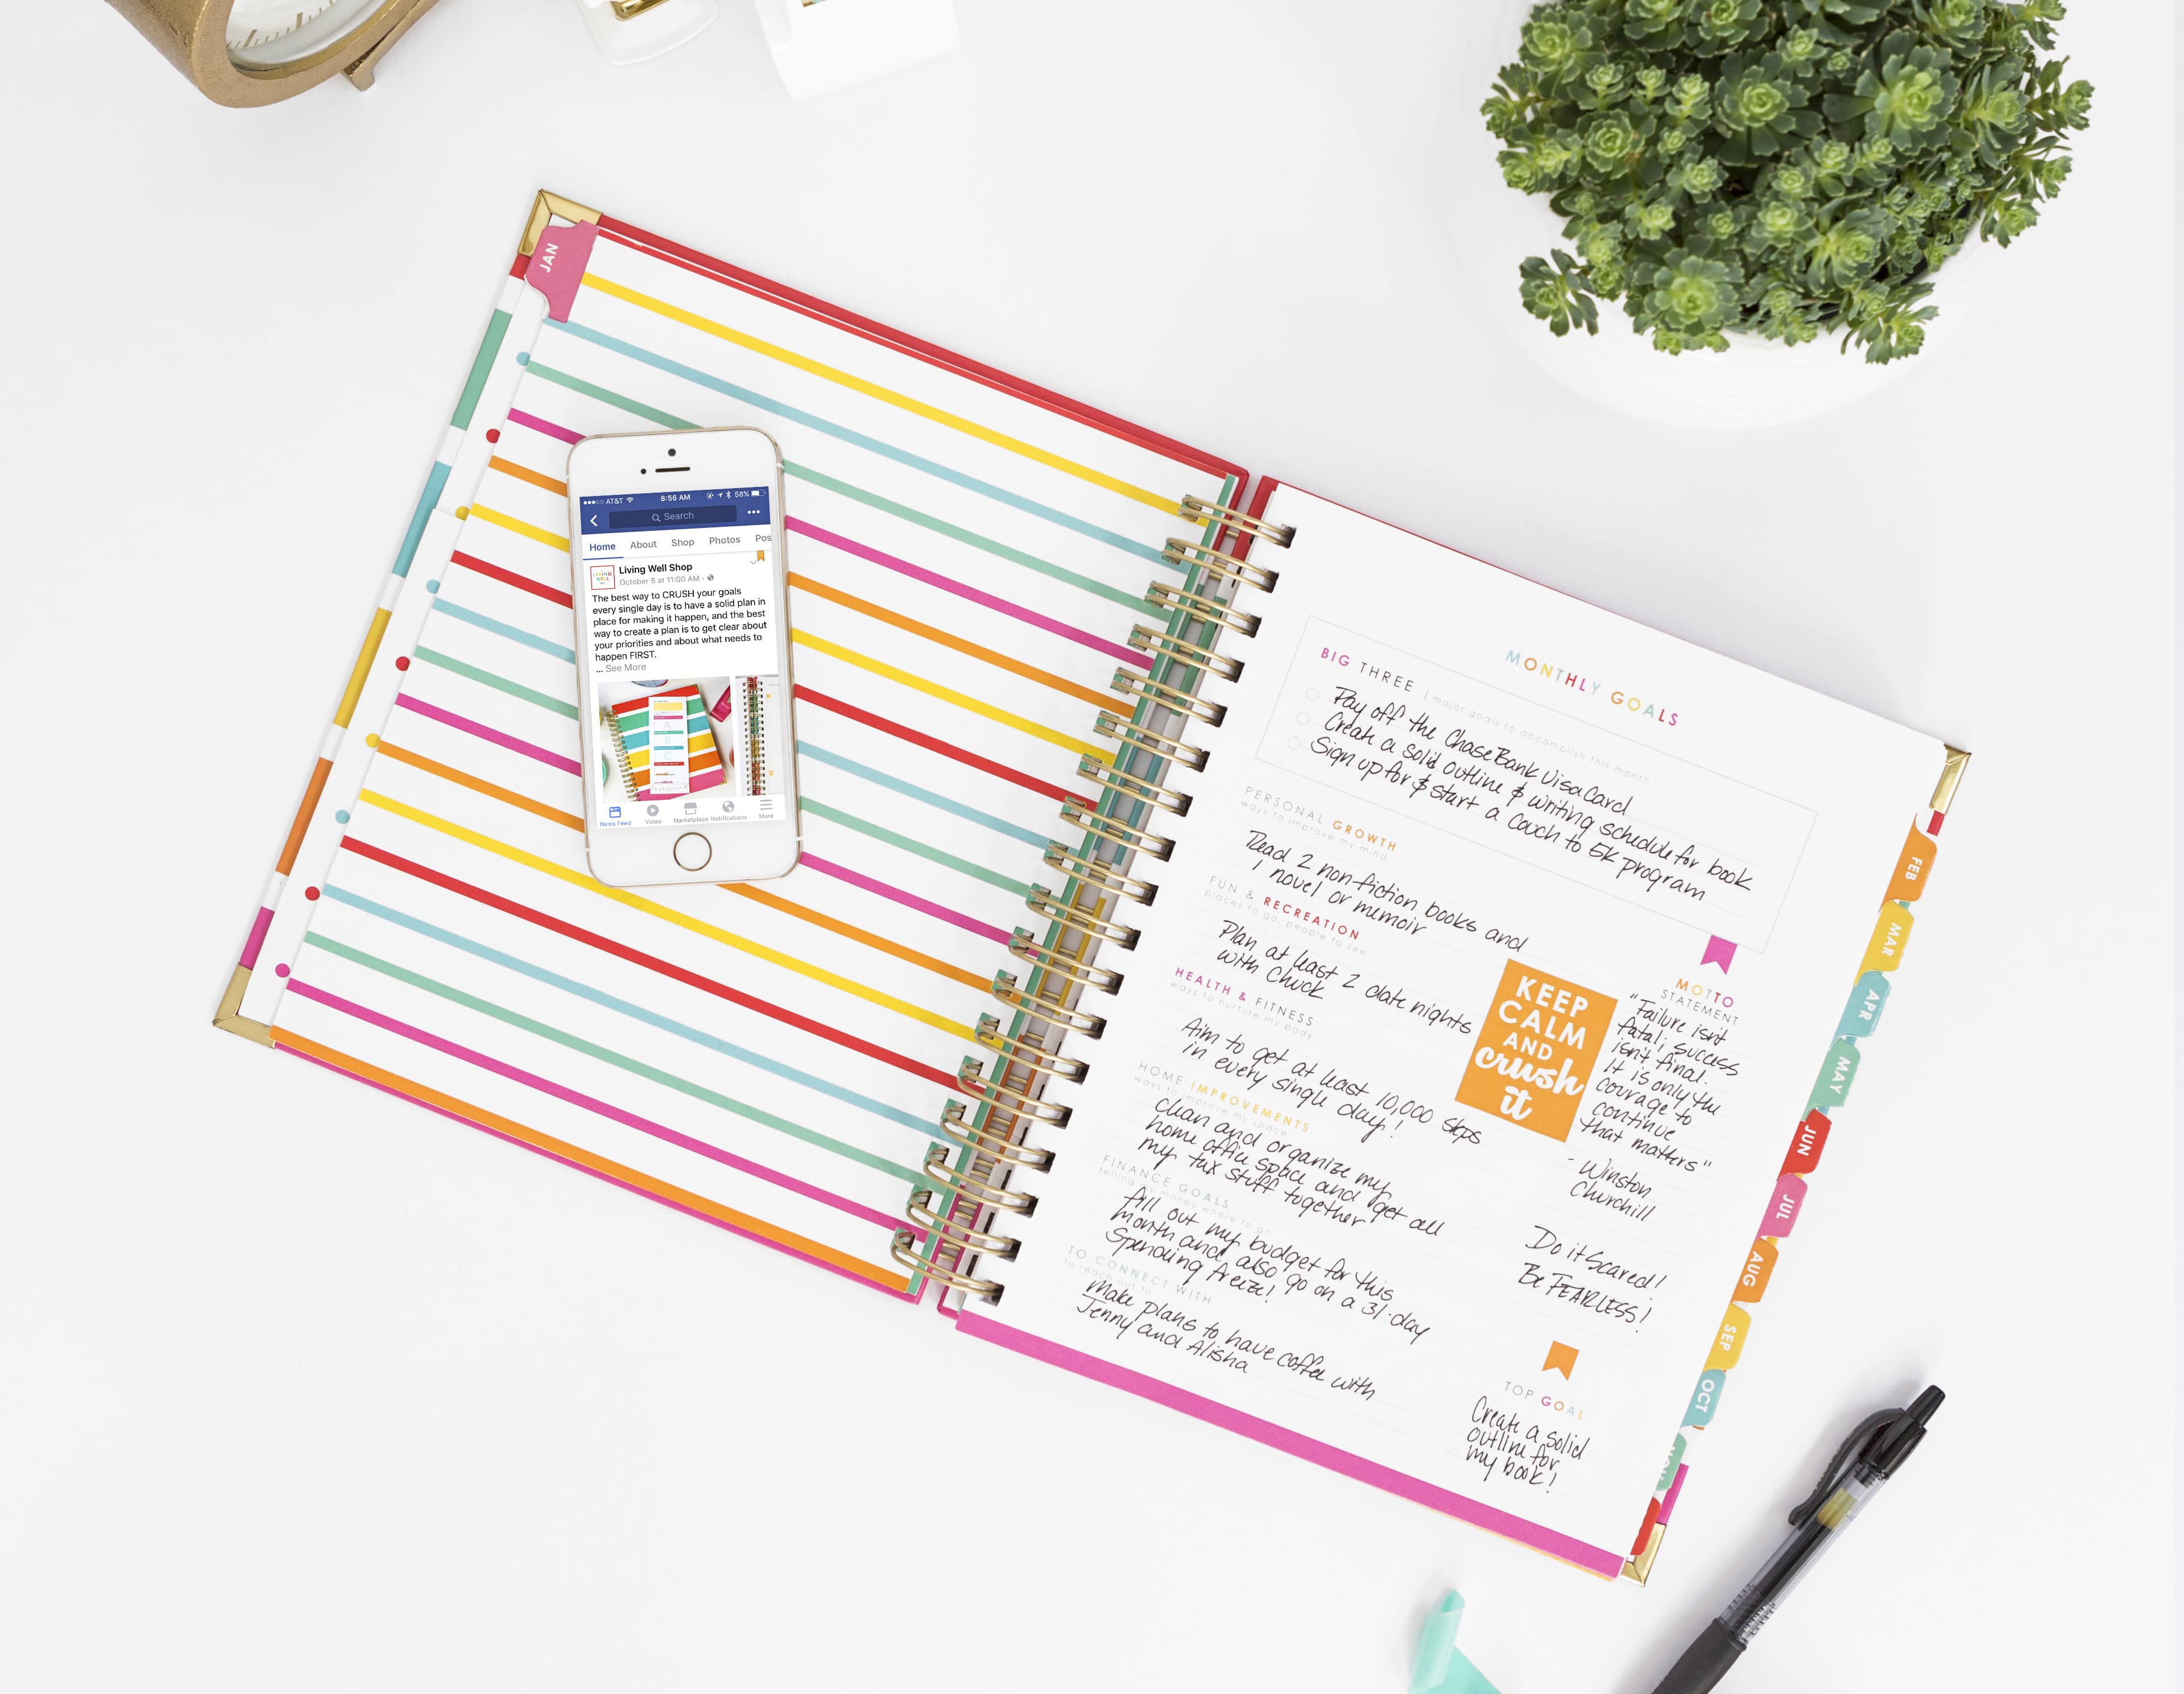 The Living Well Planner is a great tool to help you reflect on your goals for the new year